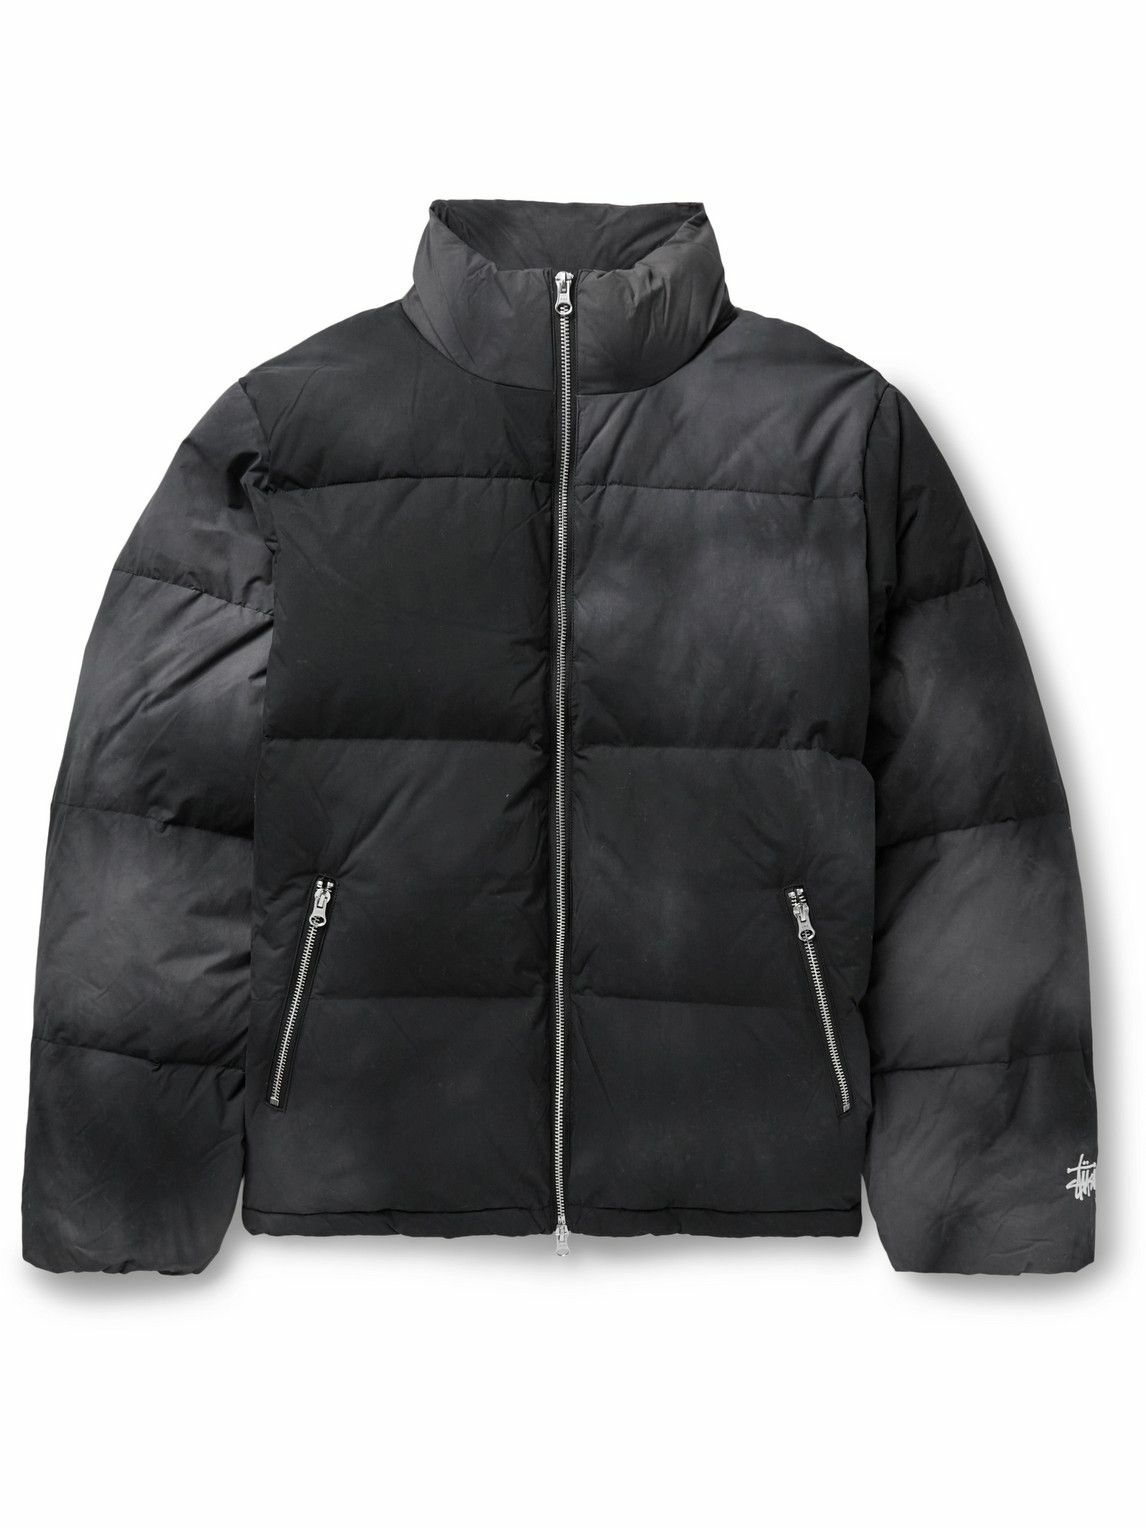 Stussy - Quilted Recycled-Nylon Jacket - Black Stussy